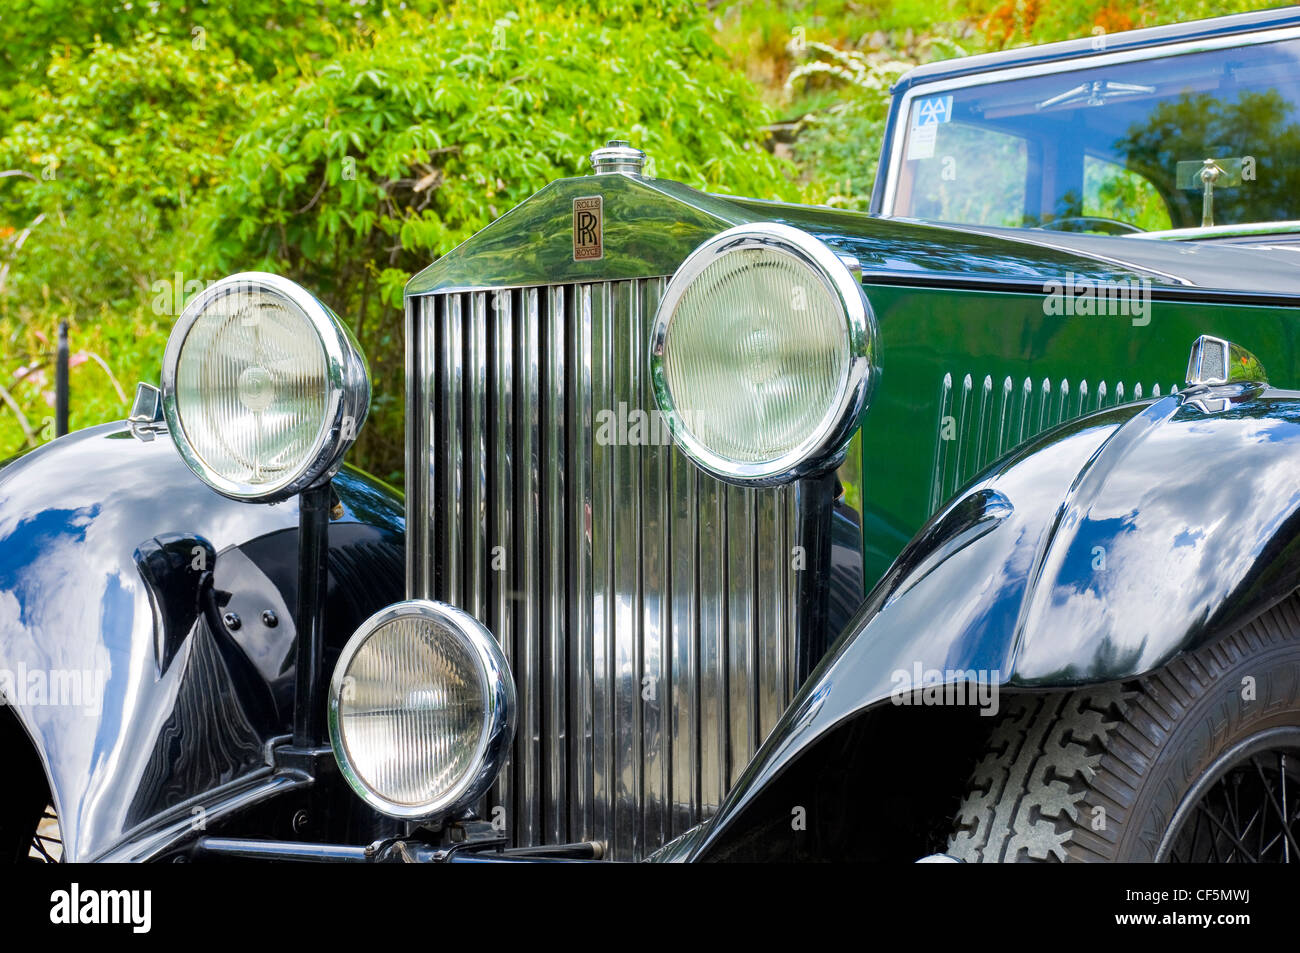 Close up of the front of a vintage Rolls Royce motor car. Stock Photo